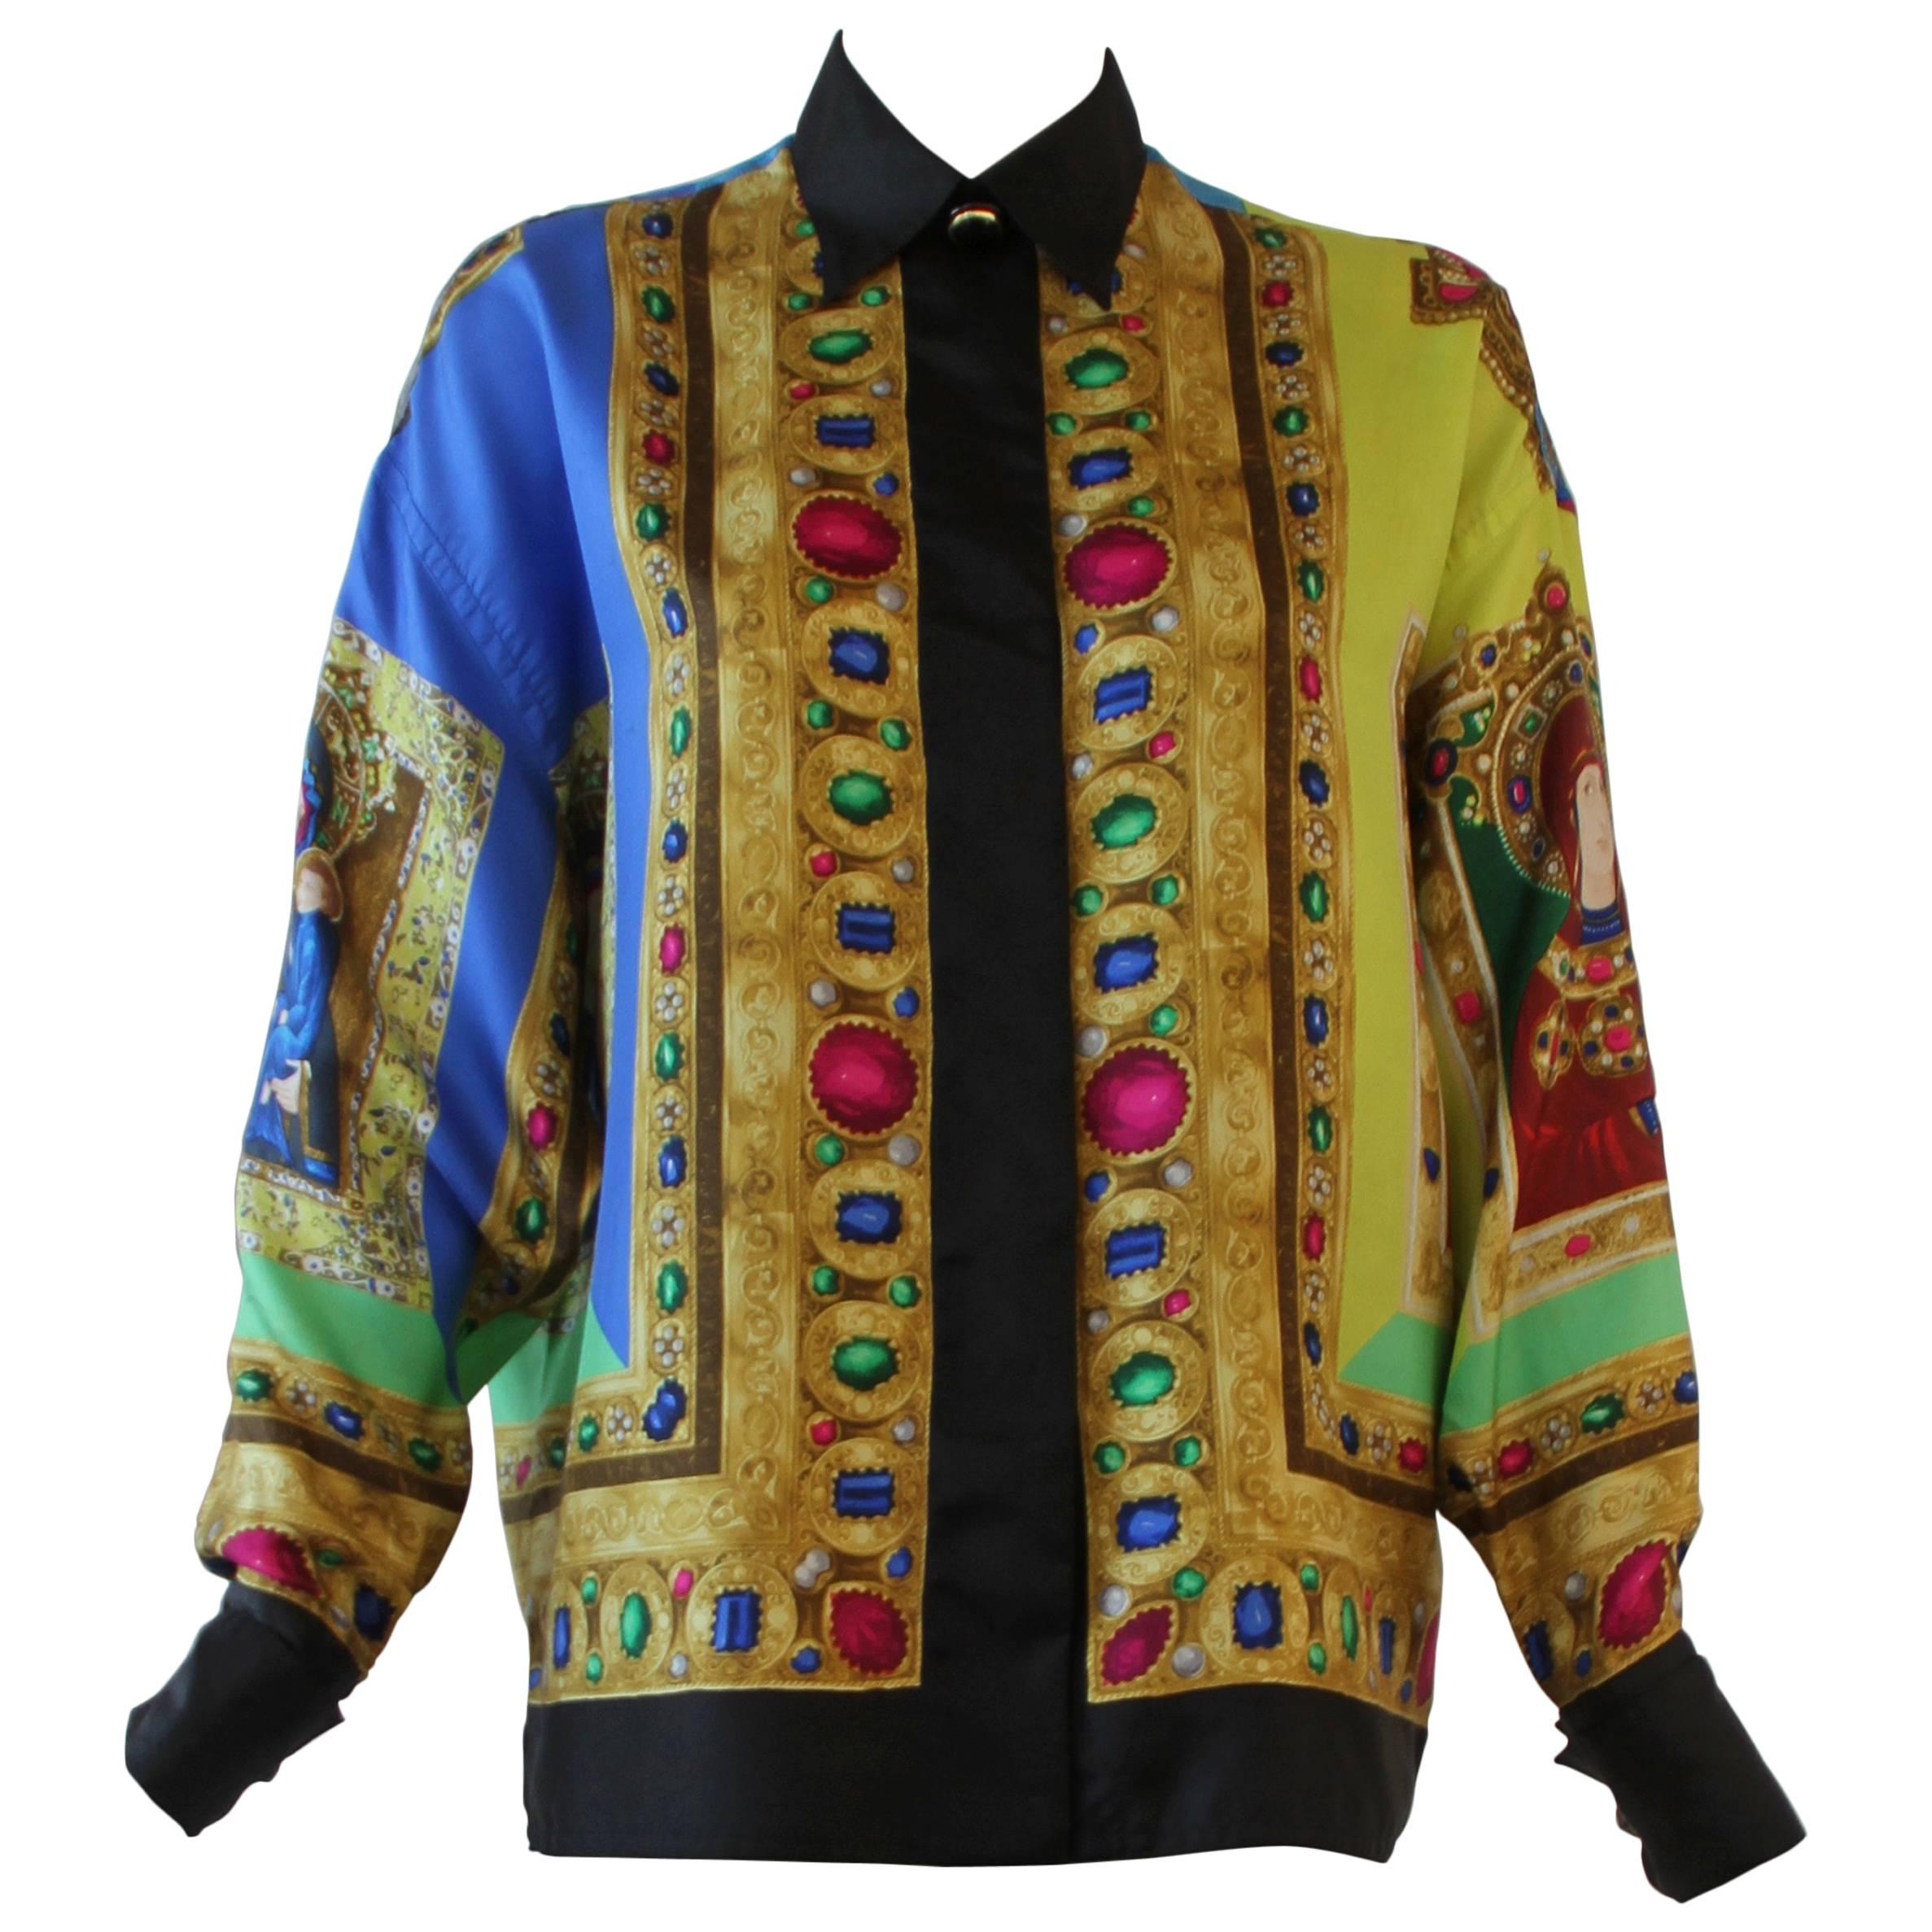 Iconic Gianni Versace Le Madonne Printed Silk Shirt Fall 1991 For Sale